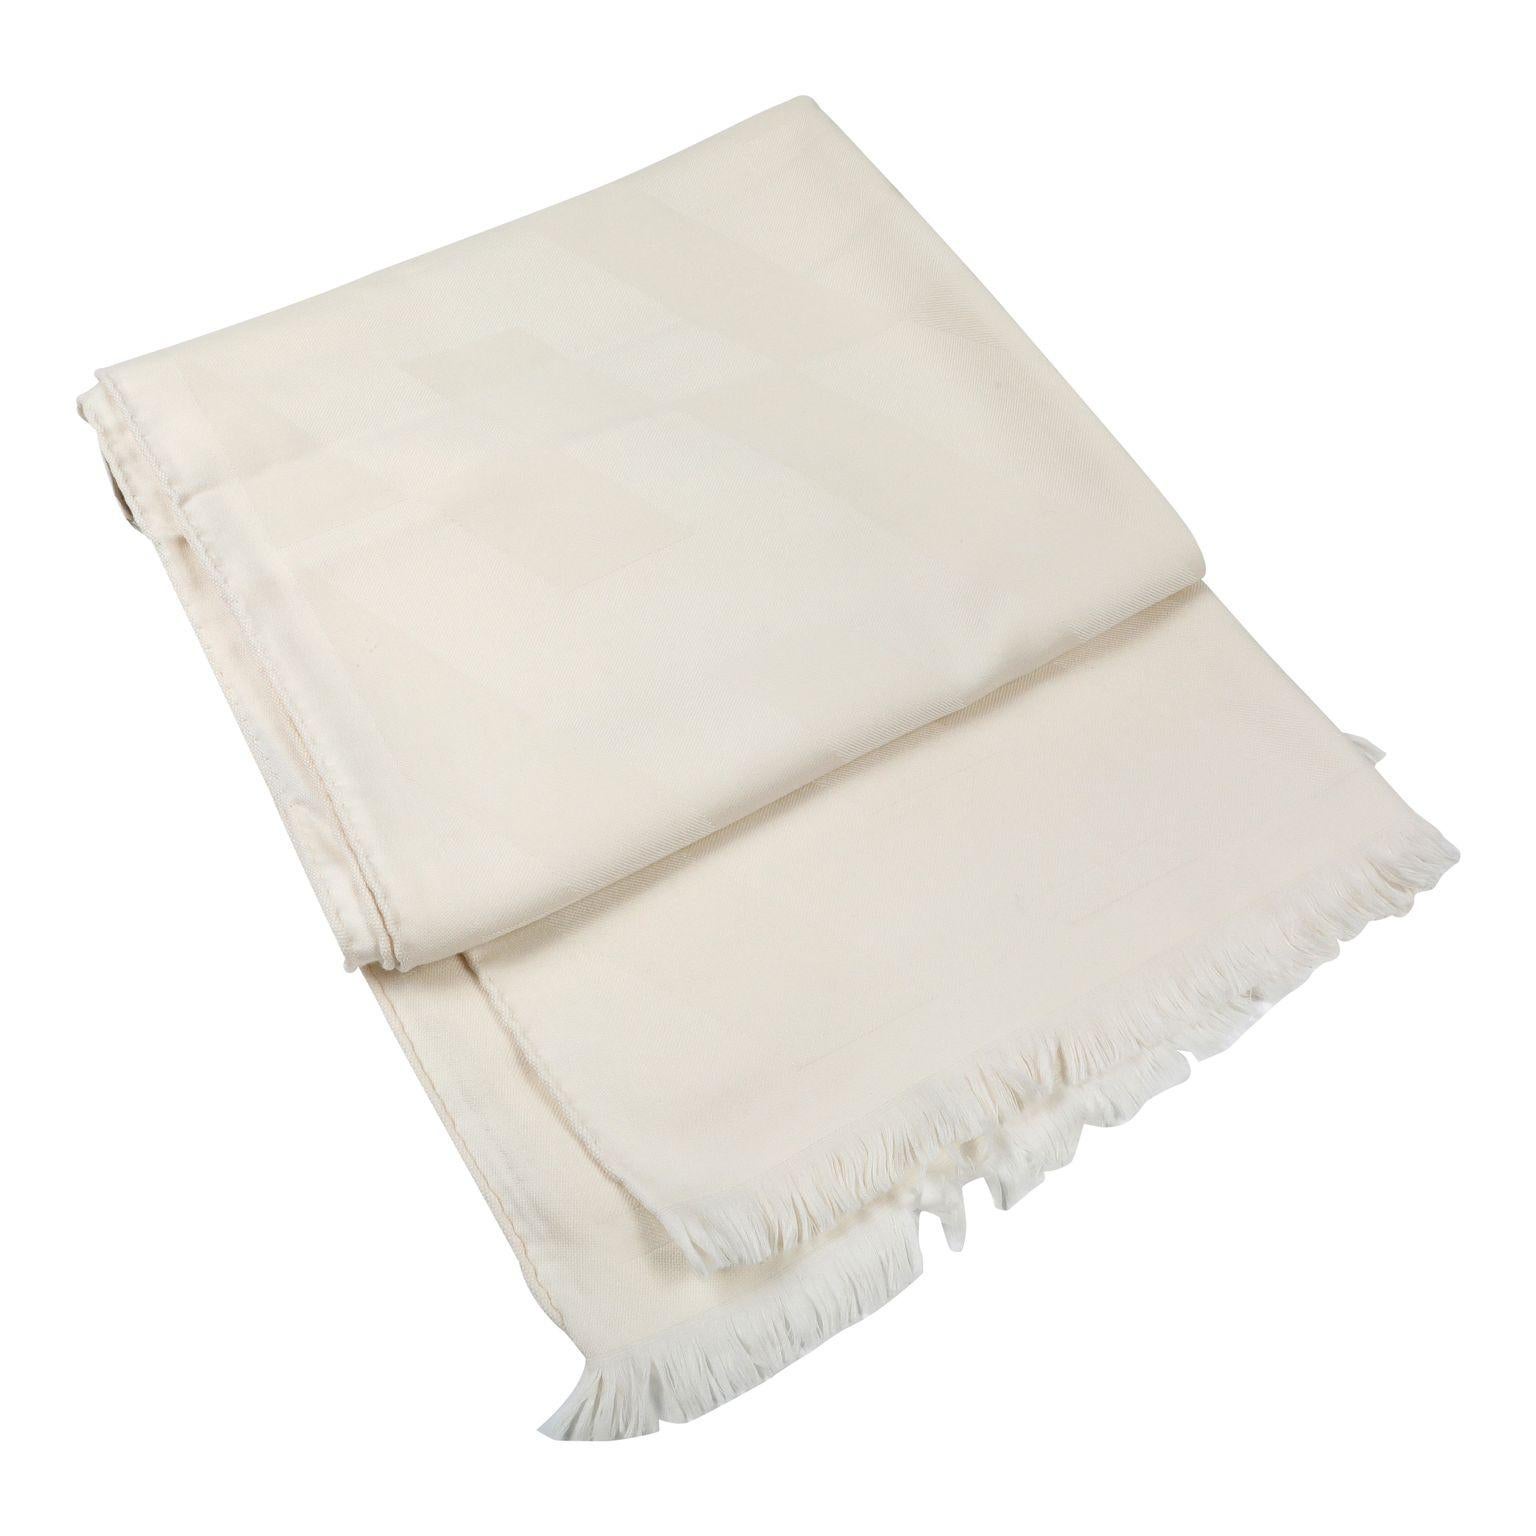 This authentic Hermès Ivory Cashmere H Scarf is pristine.  Plush ivory cashmere, fringed edges.  

ACO 13831

